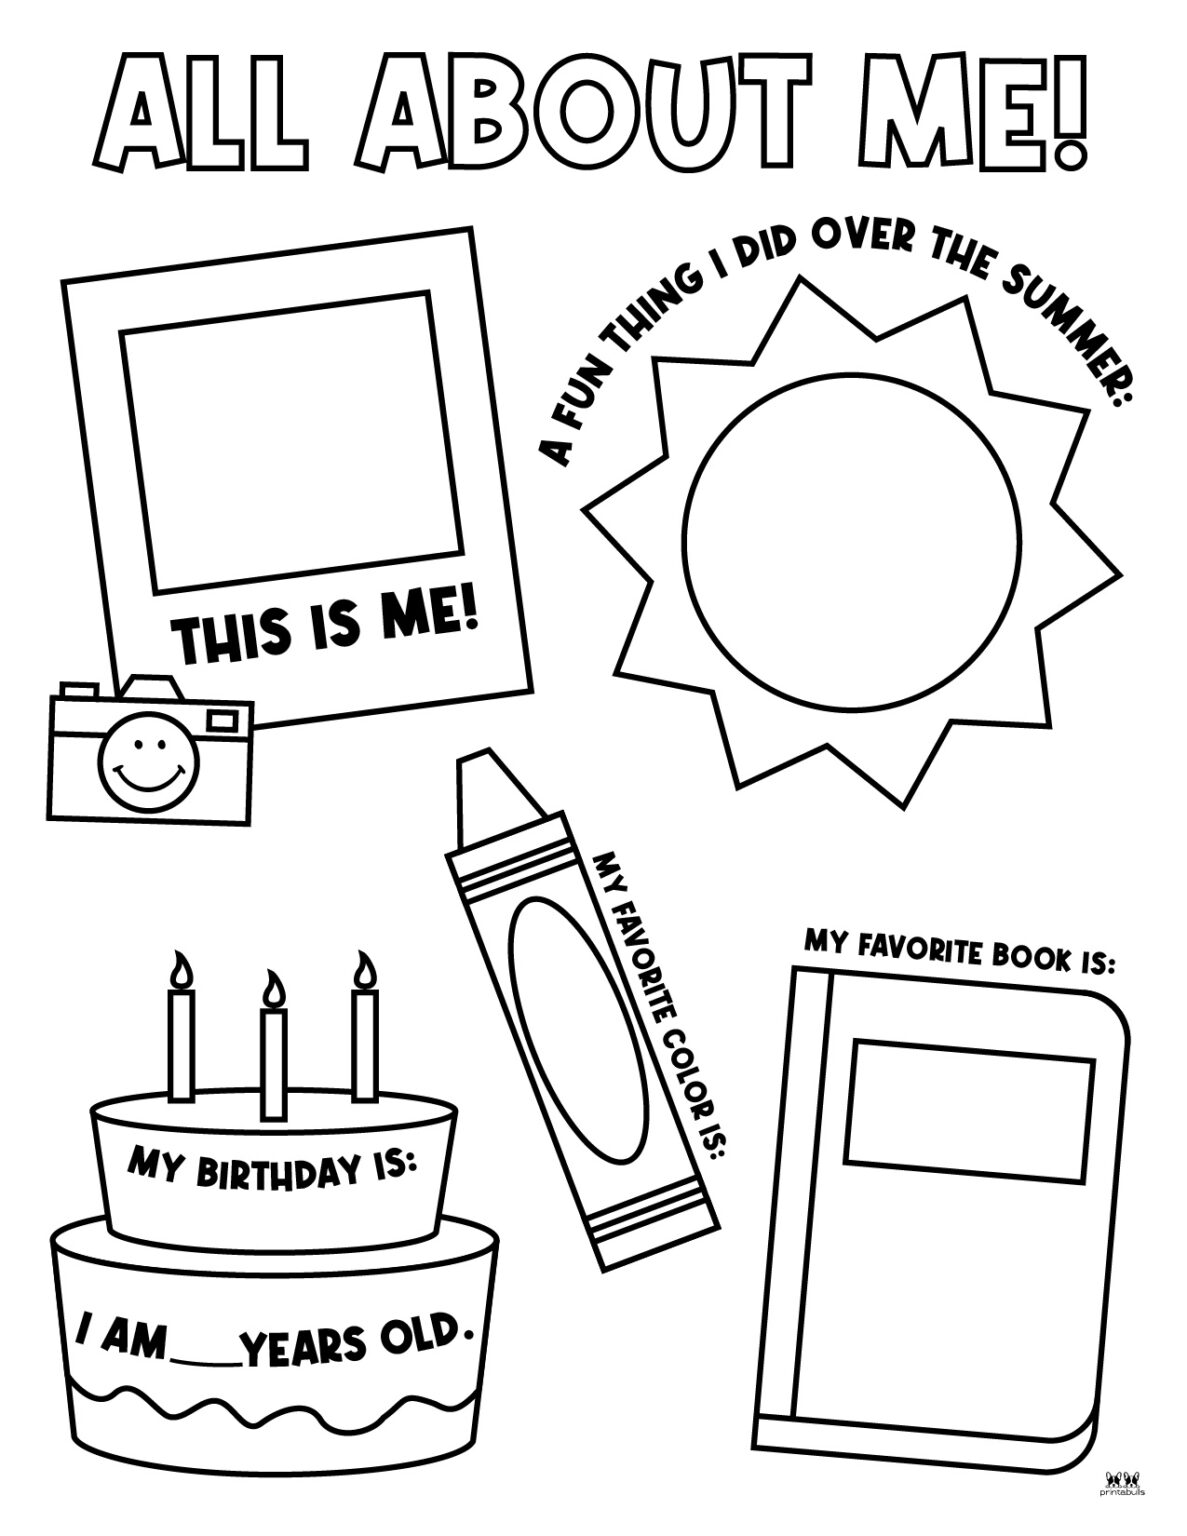 50 All About Me Worksheet 1